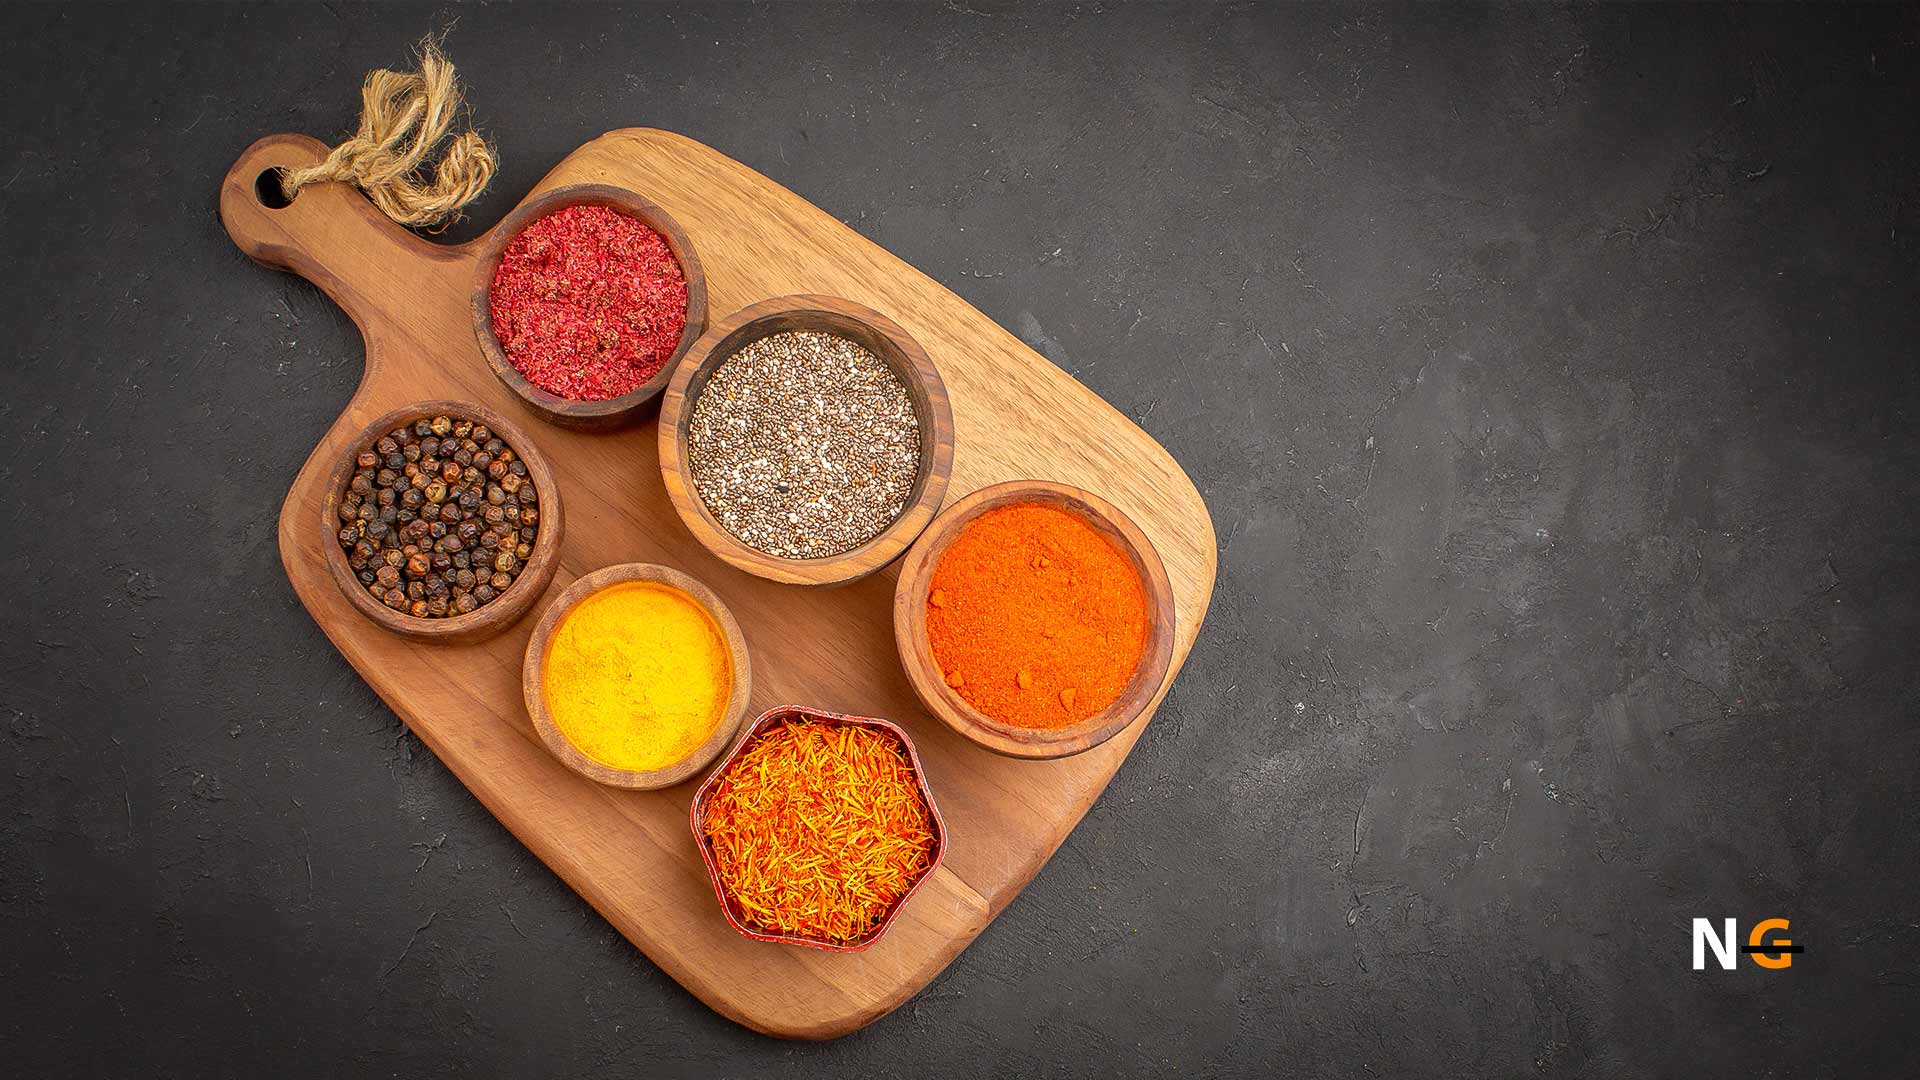 Are Seasoning Blends and Spice Mixes Gluten Free